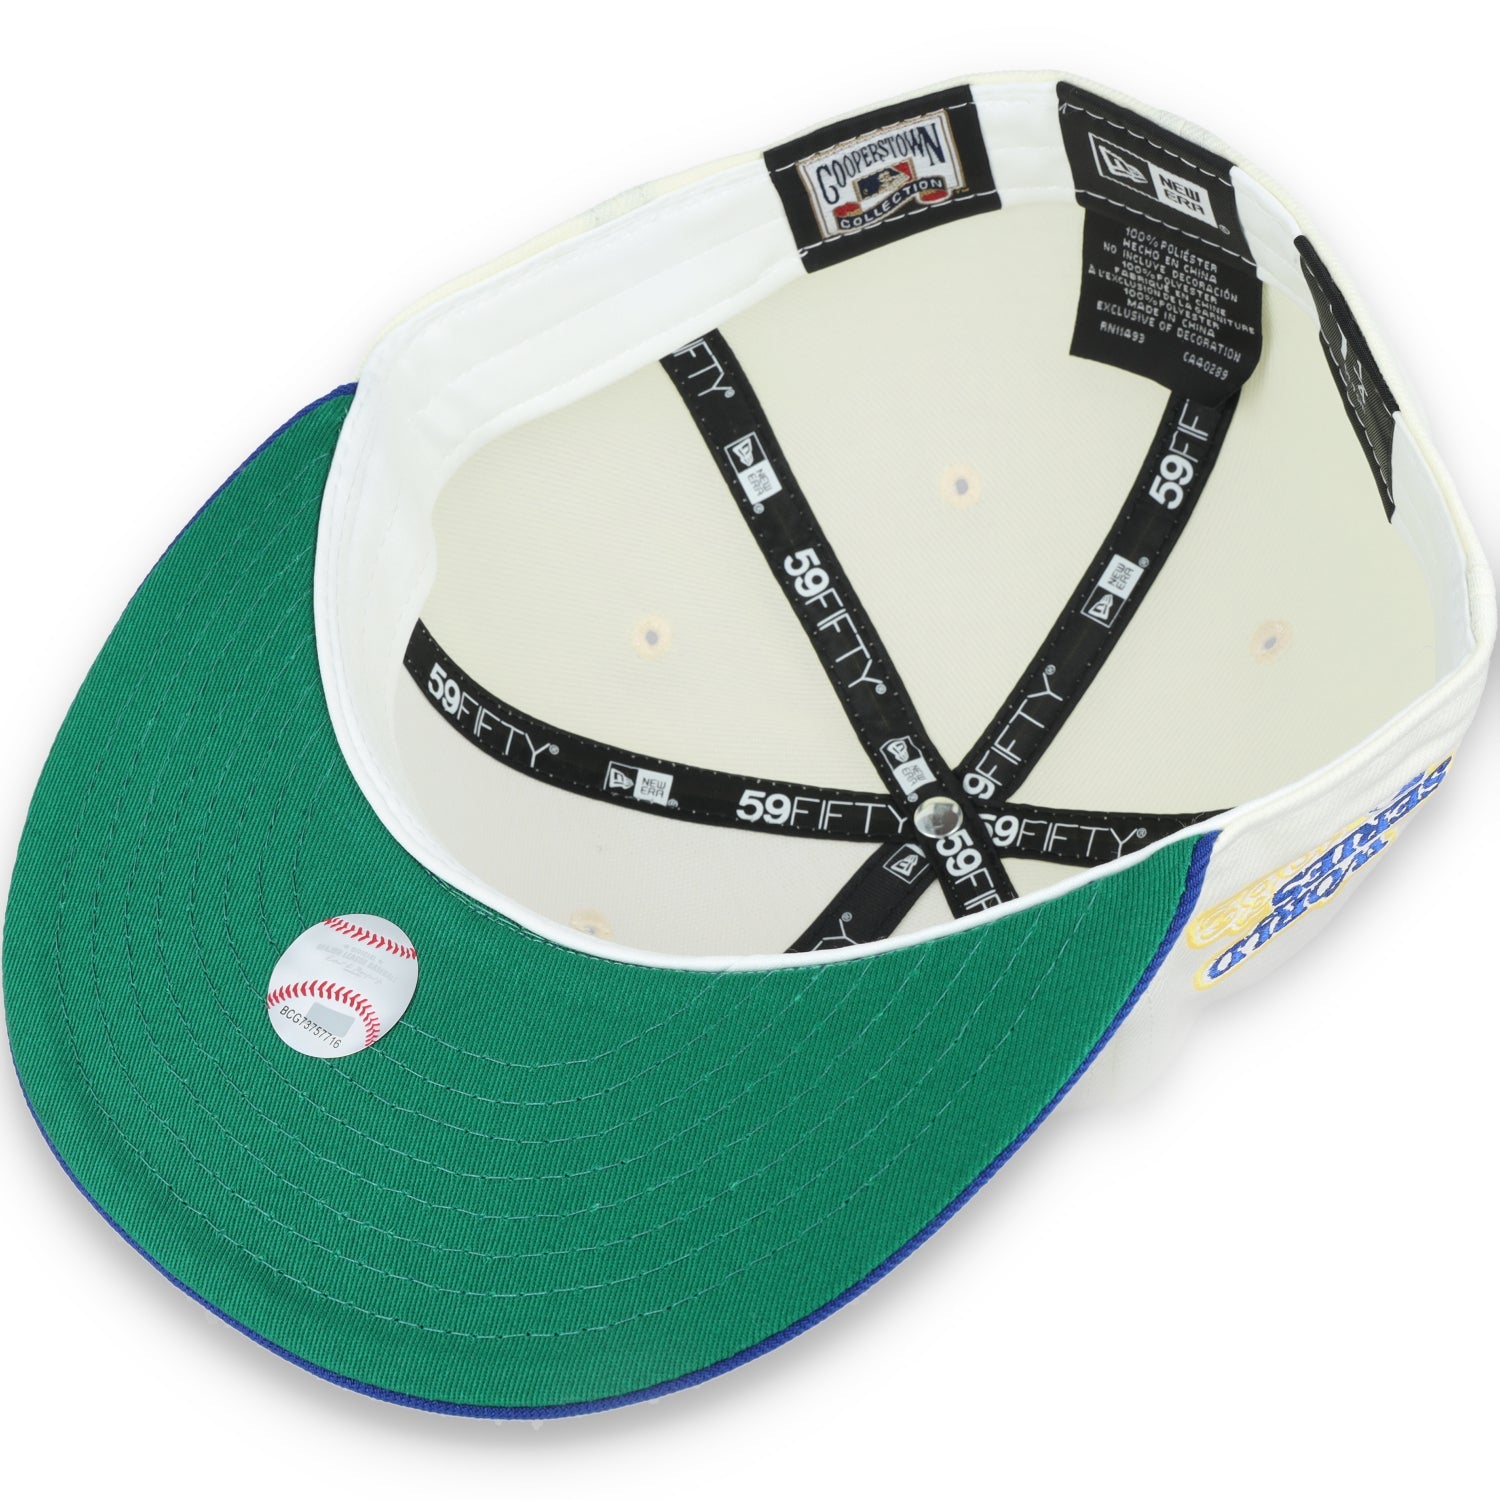 New Era Milwaukee Brewers 1982 World Series Patch 59FIFTY Fitted Ivory Hat